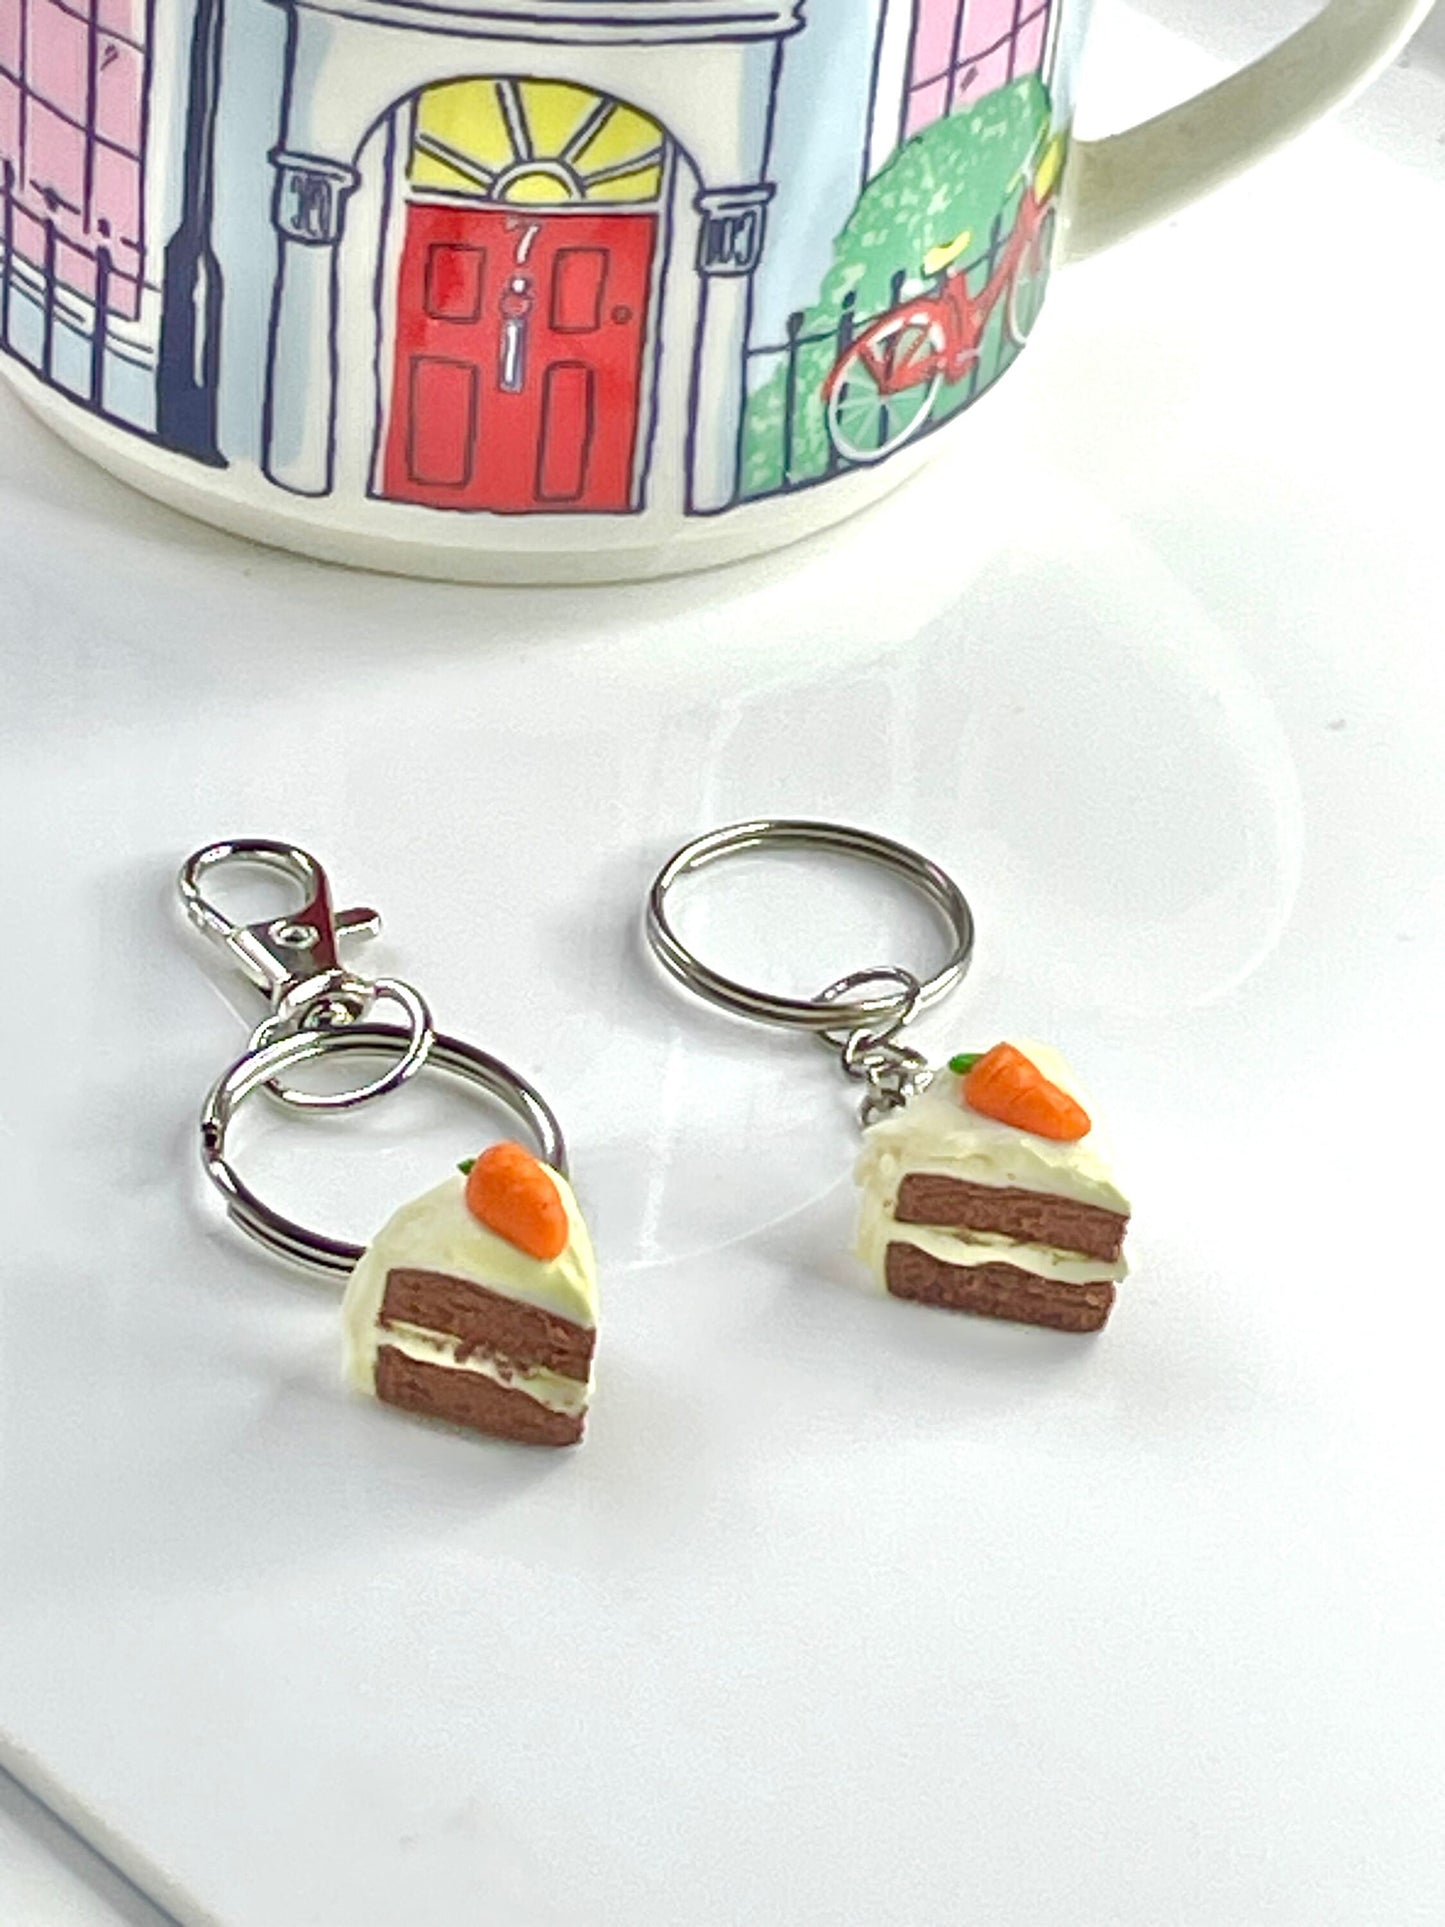 Handmade Clay Carrot Cake Quirky Keyring